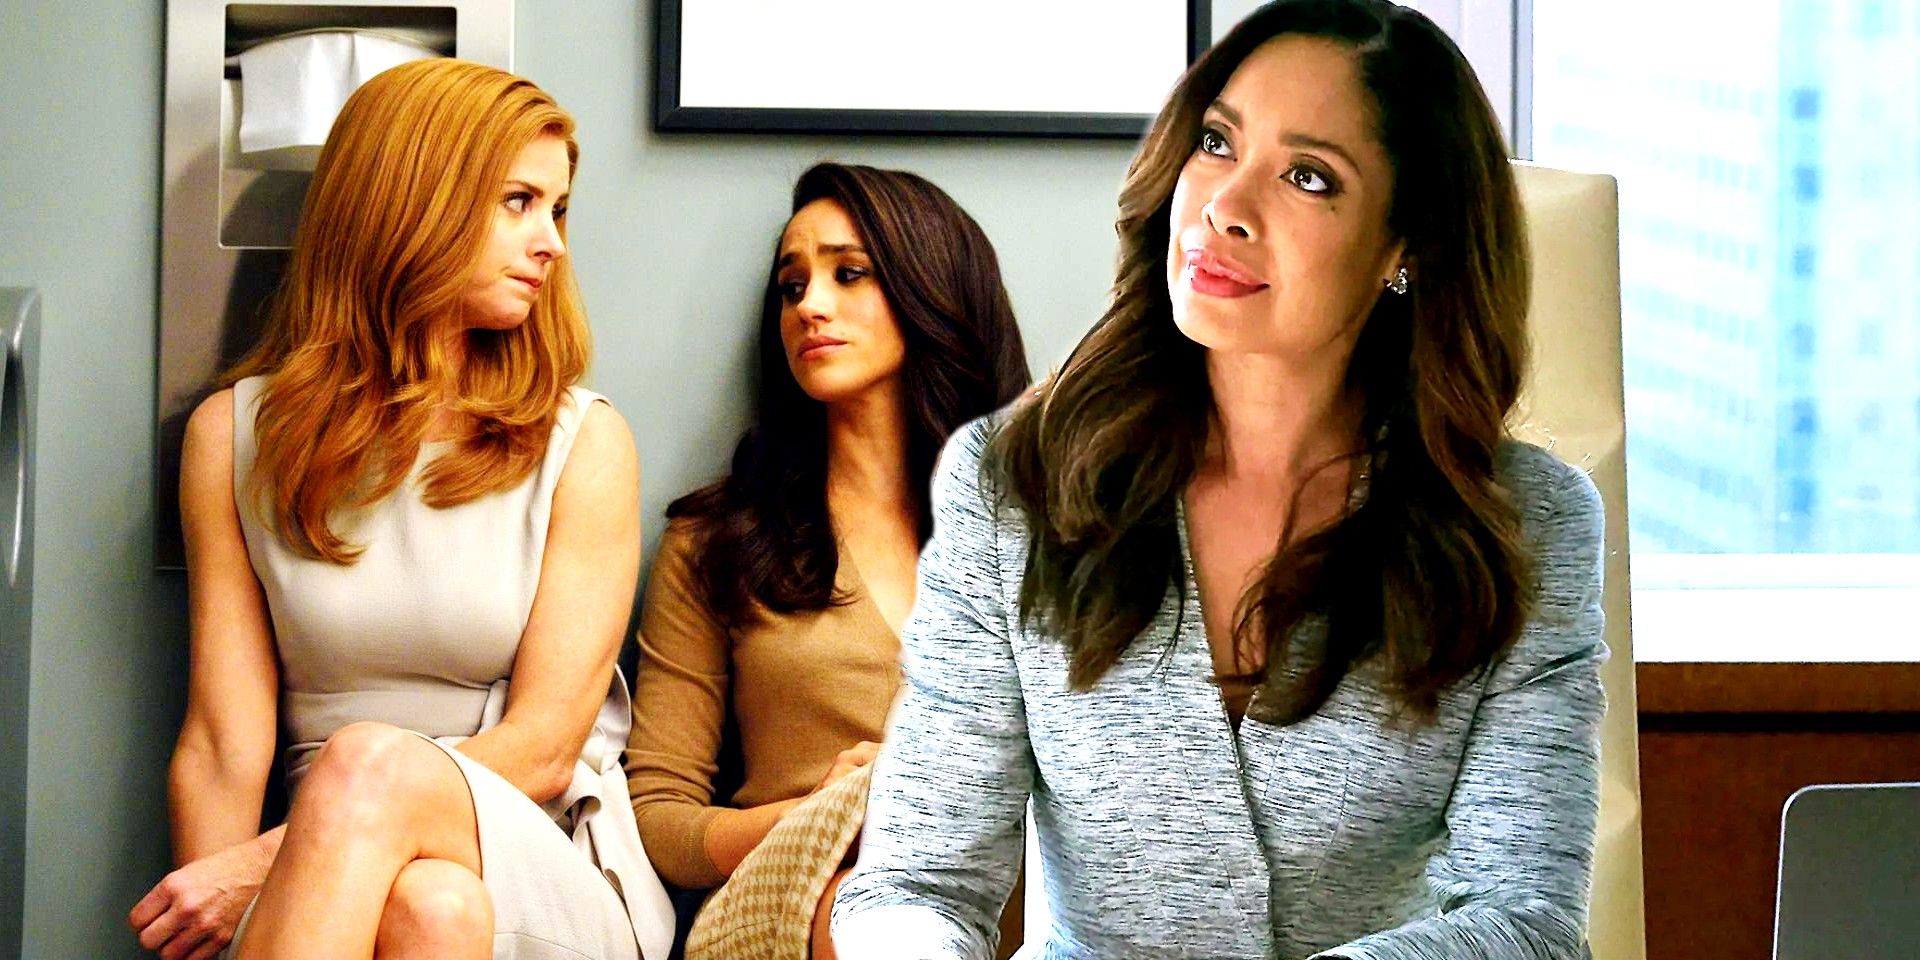 Custom image with Jessica, Rachel, and Donna in Suits